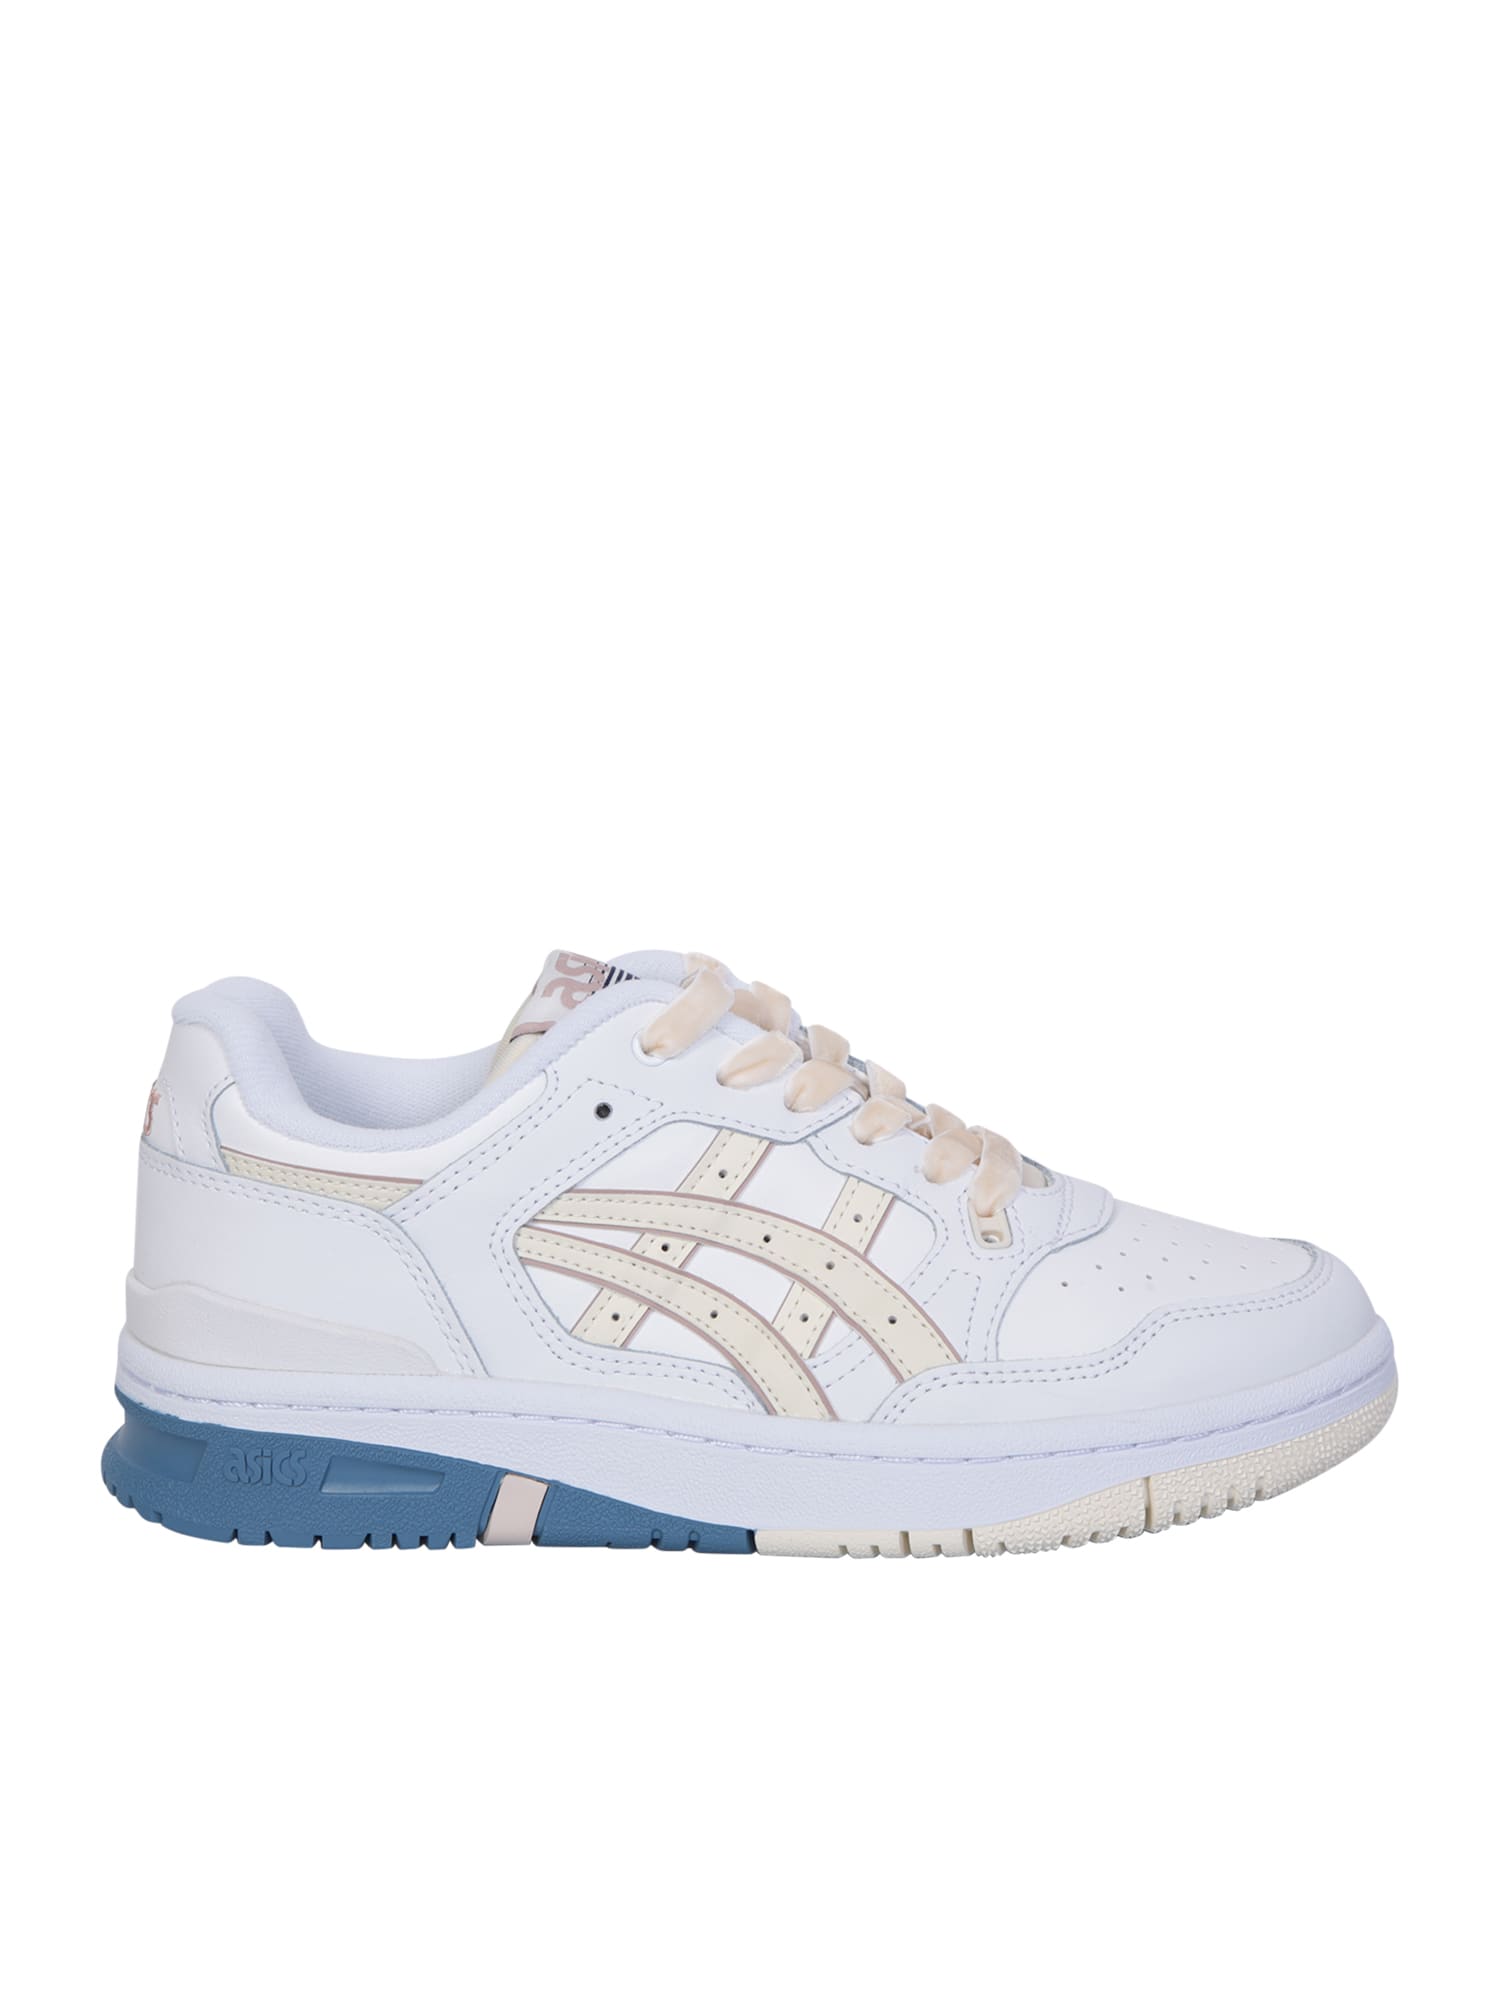 Shop Asics White And Beige Ex89 Sneakers